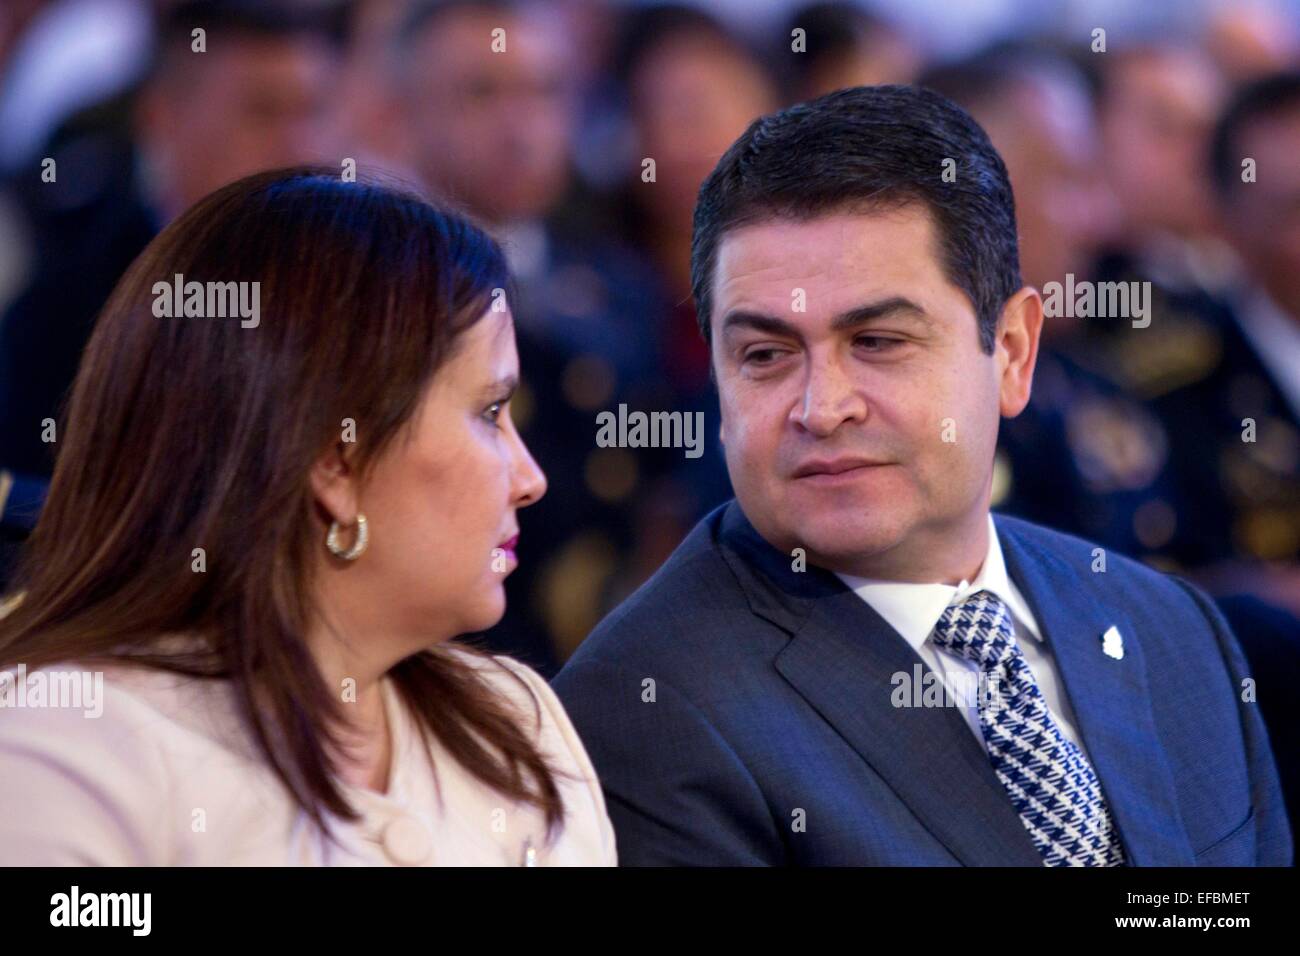 Tegucigalpa, Honduras. 30th Jan, 2015. Honduras' President Juan Orlando Hernandez (R) and his wife Ana Garcia de Hernandez (L) attend a religious service commemorating the 268th anniversary of the discovery of the Virgin of Suyapa, which is a six-centimeter tall 18th-century statue of the Virgin Mary, in the Suyapa Basilica, in Tegucigalpa, Honduras, on Jan. 30, 2015. Credit:  Rafael Ochoa/Xinhua/Alamy Live News Stock Photo